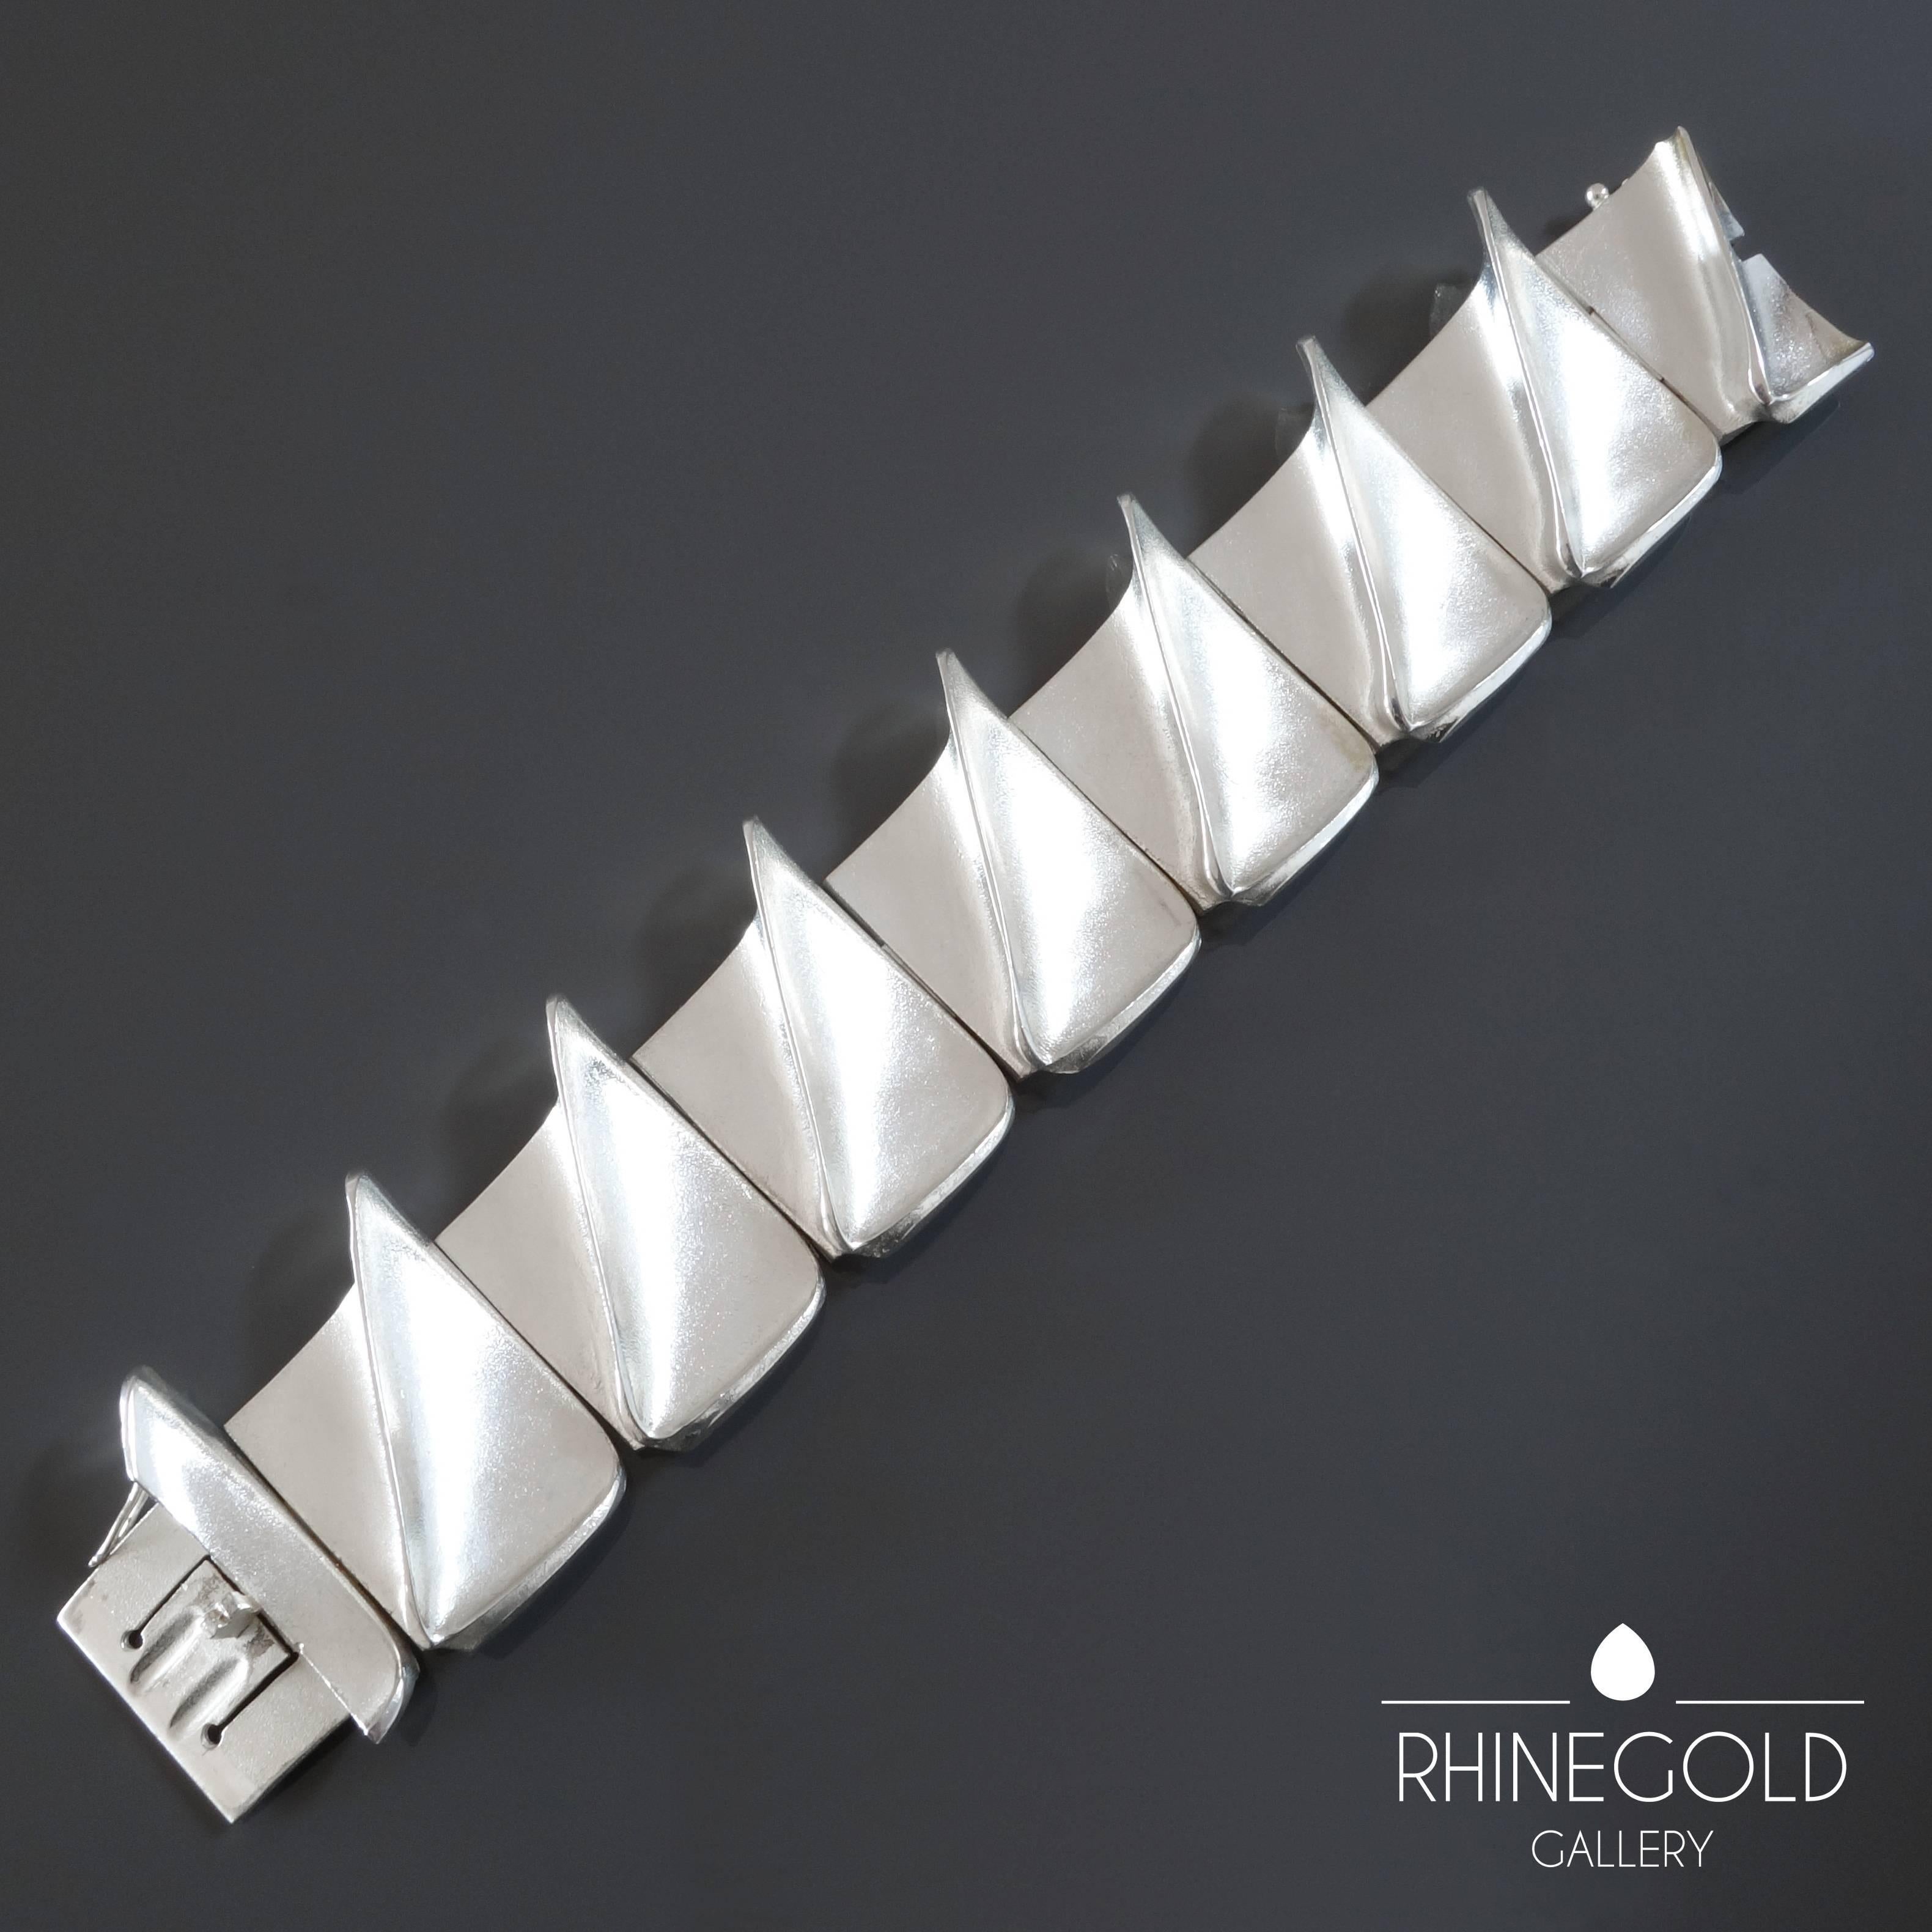 'Silver Sails' 1970s Lapponia Björn Weckström Modernist Bracelet
Sterling Silver
Length (when closed) 18.7 cm; width 3.7 cm (approx. 7 3/8” by 1 7/16”)
Weight approx. 114.8 grams
Marks: ‘[company mark] 925 [Finnish national mark] V7 (= year mark for